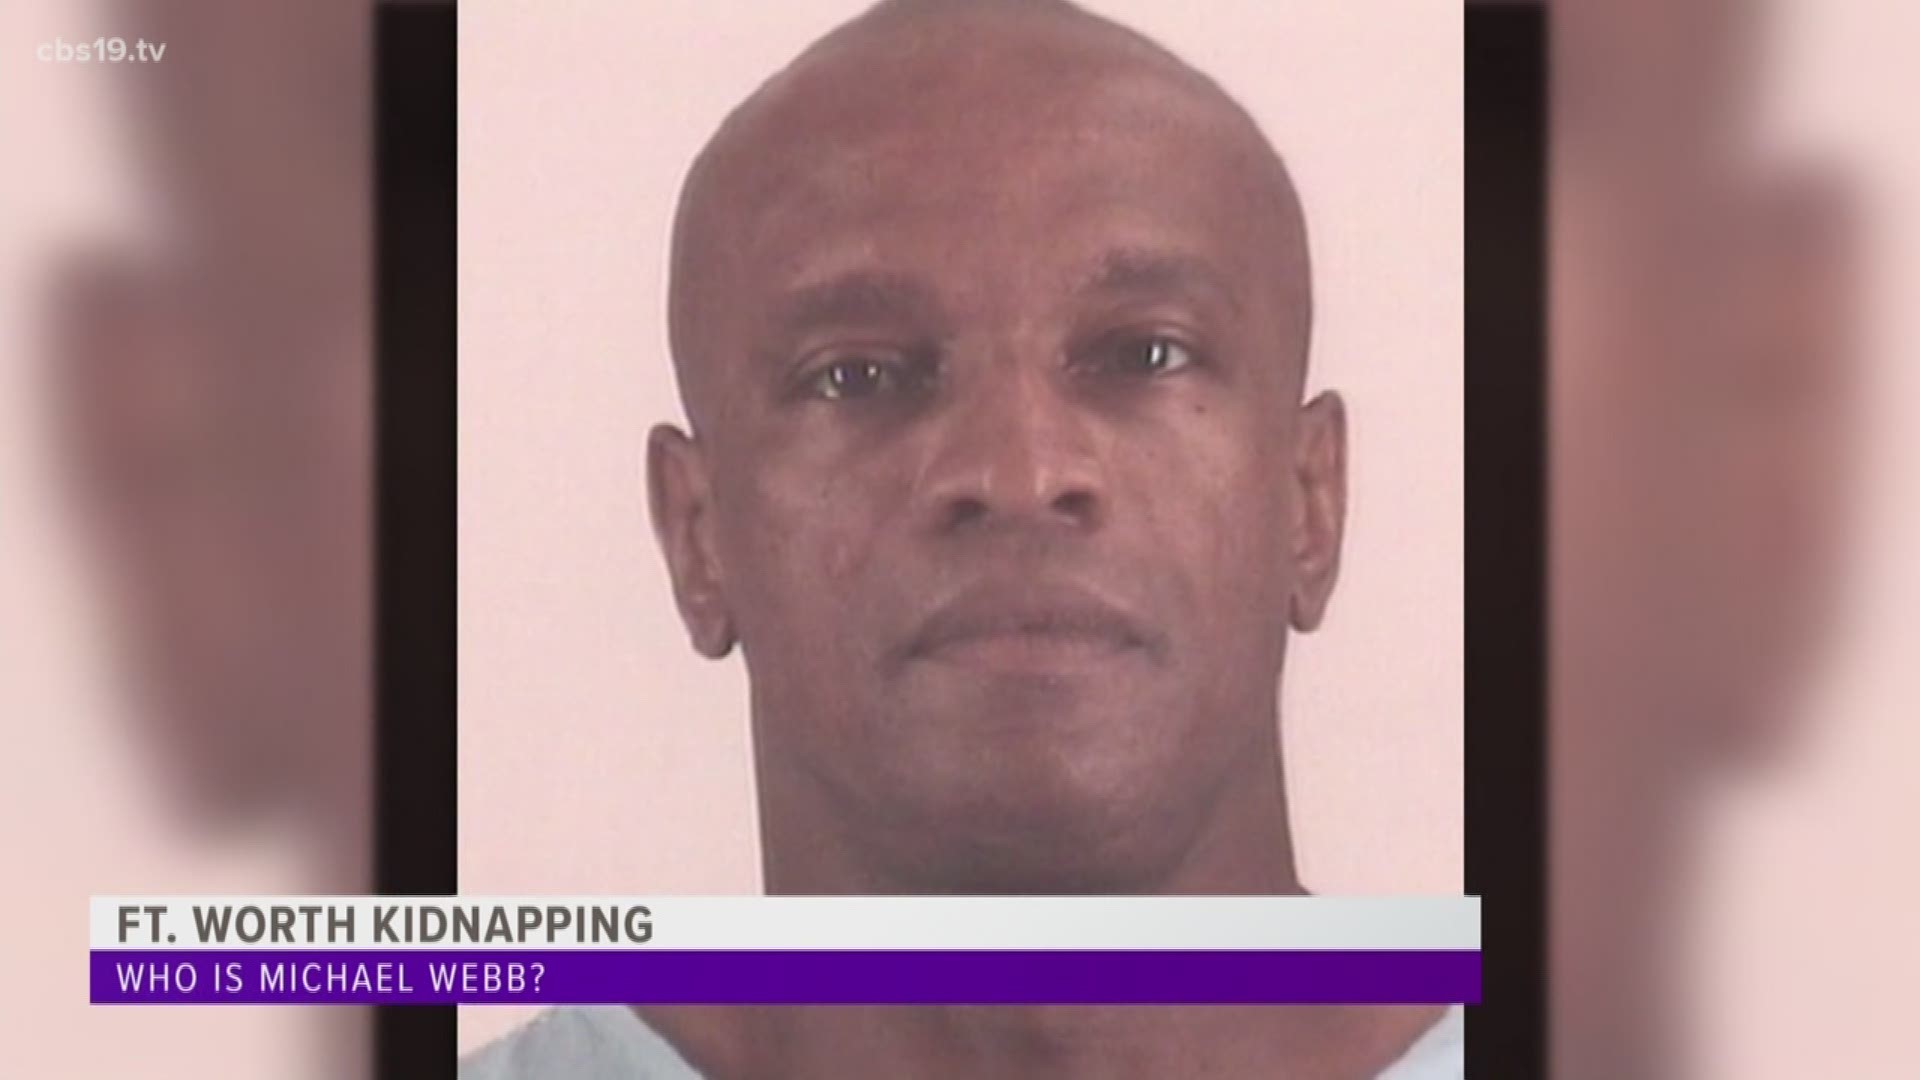 Following the kidnapping in Fort Worth, Michael Webb is facing charges of aggravated kidnapping. Turns out, he's from Tyler, so CBS 19's Darcy Birden set out to discover his past.